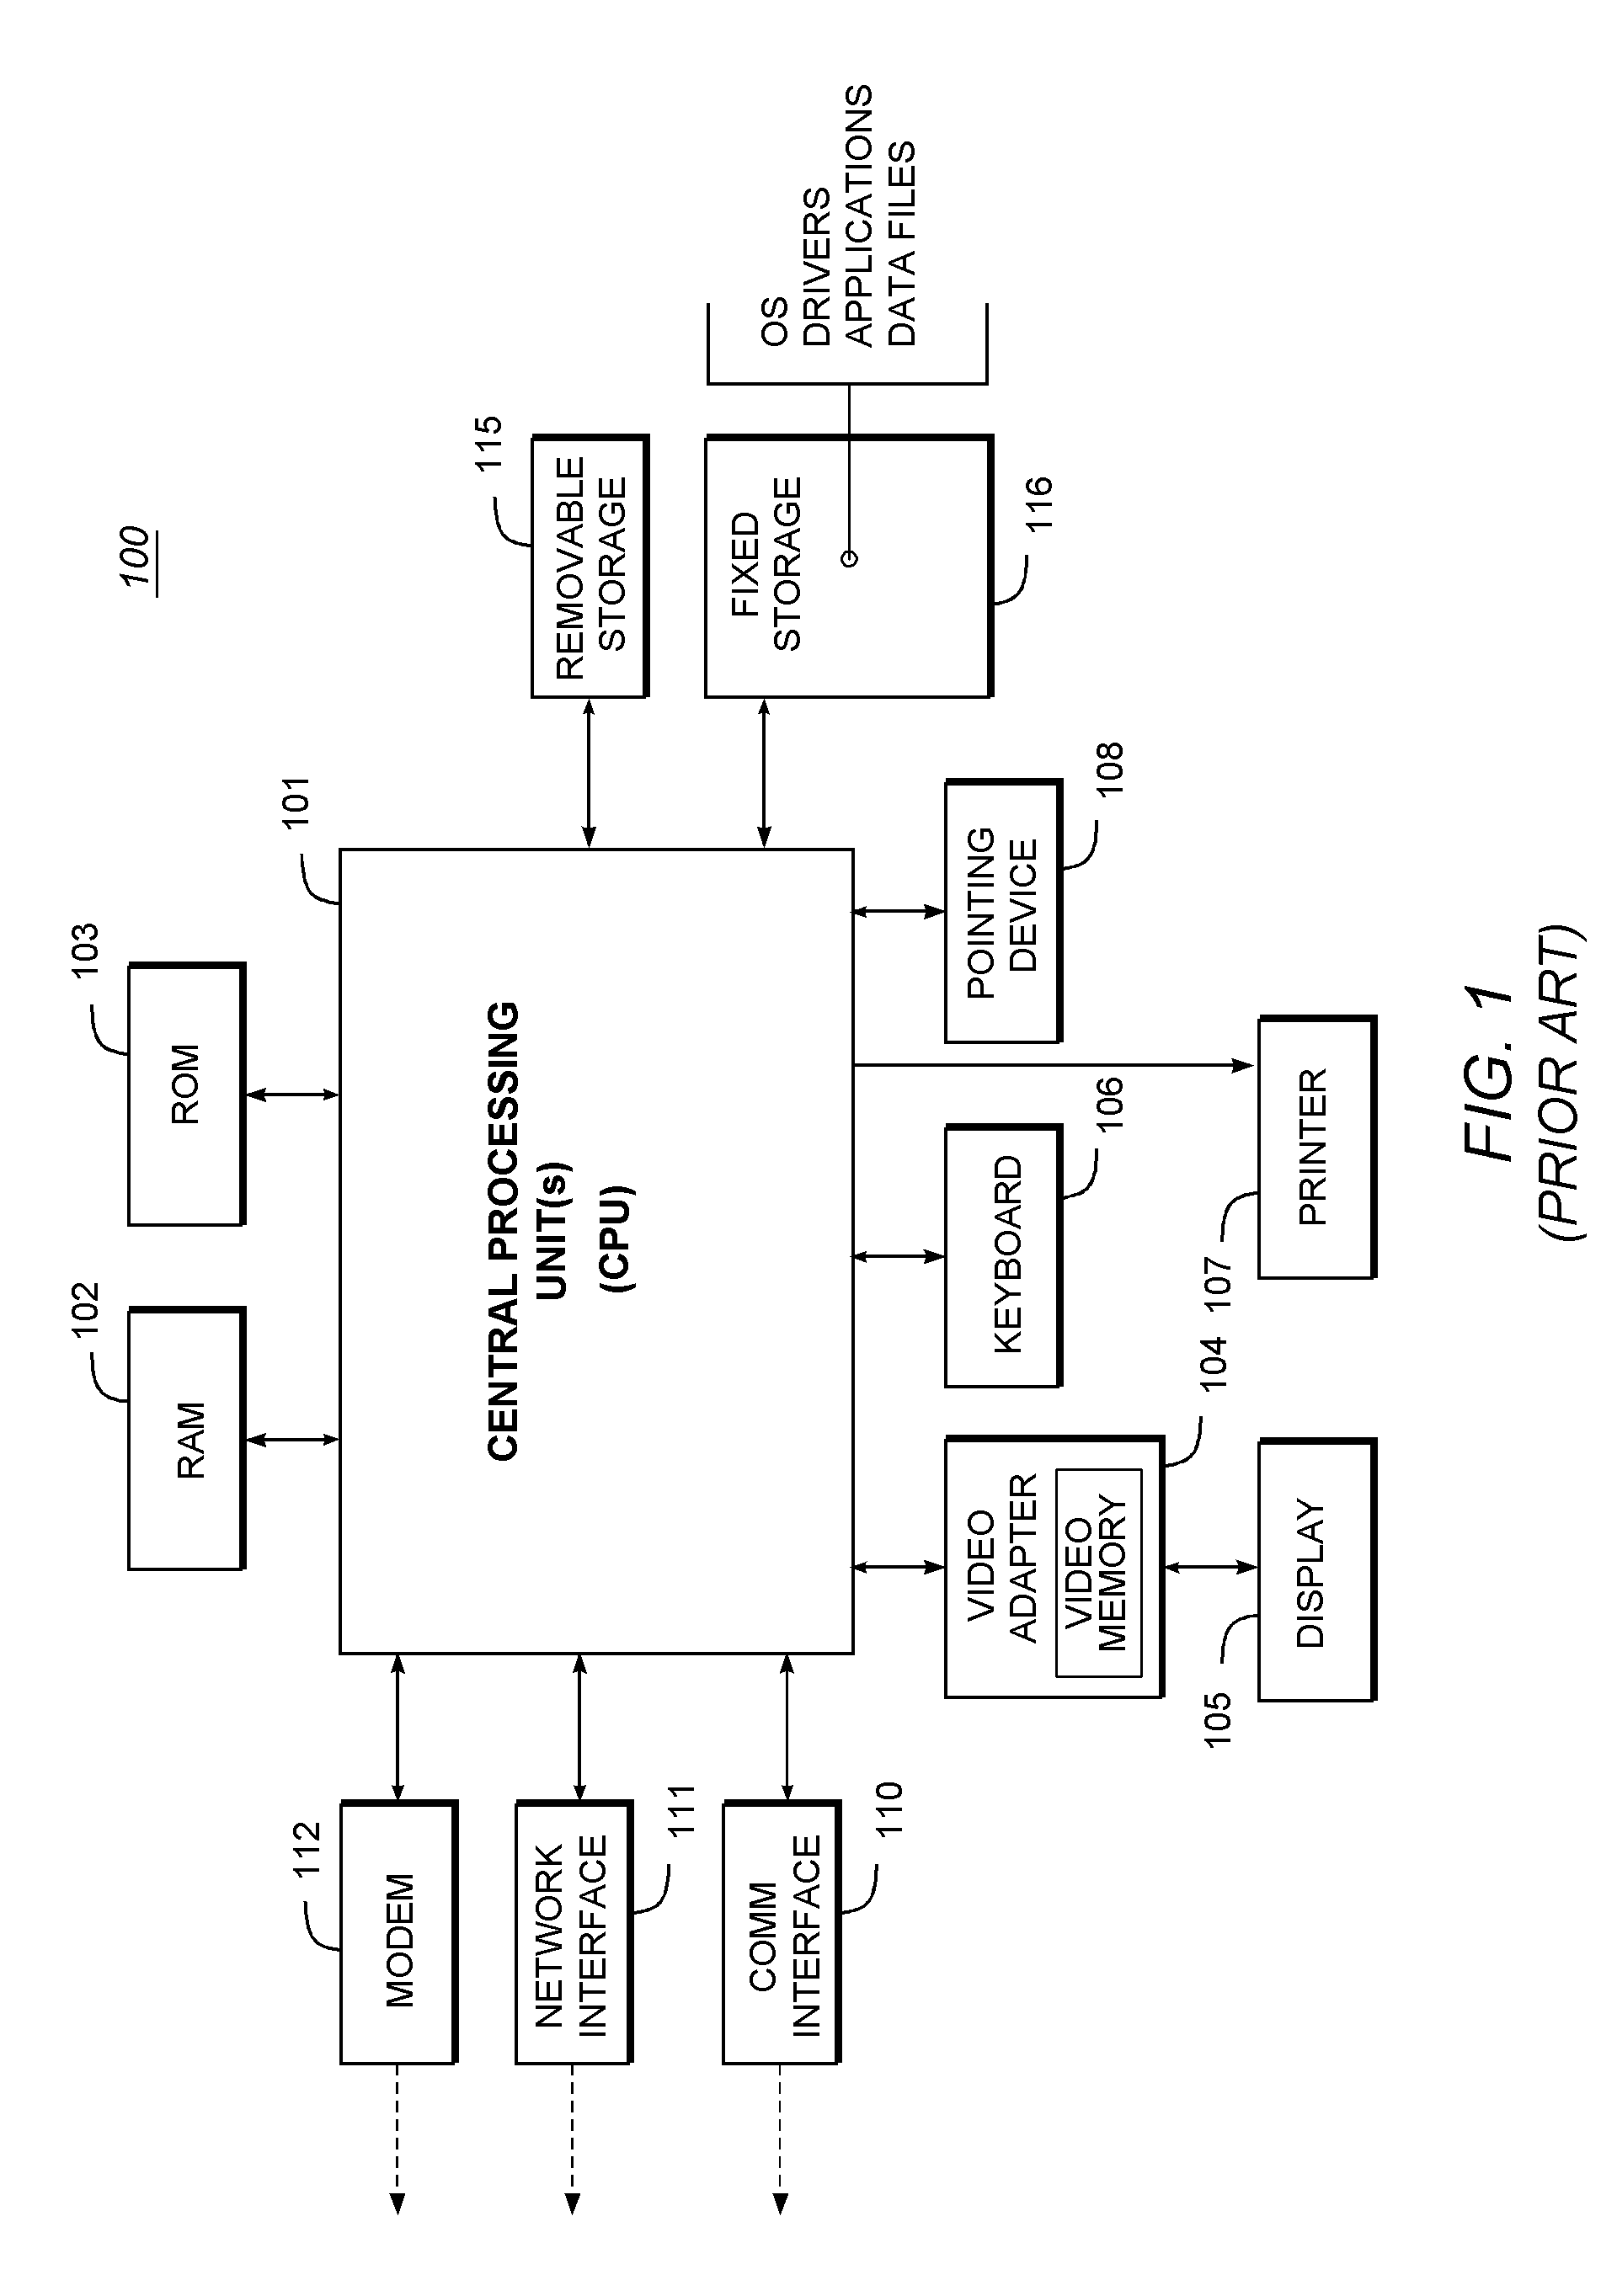 Database System with Methodology for Automated Determination and Selection of Optimal Indexes